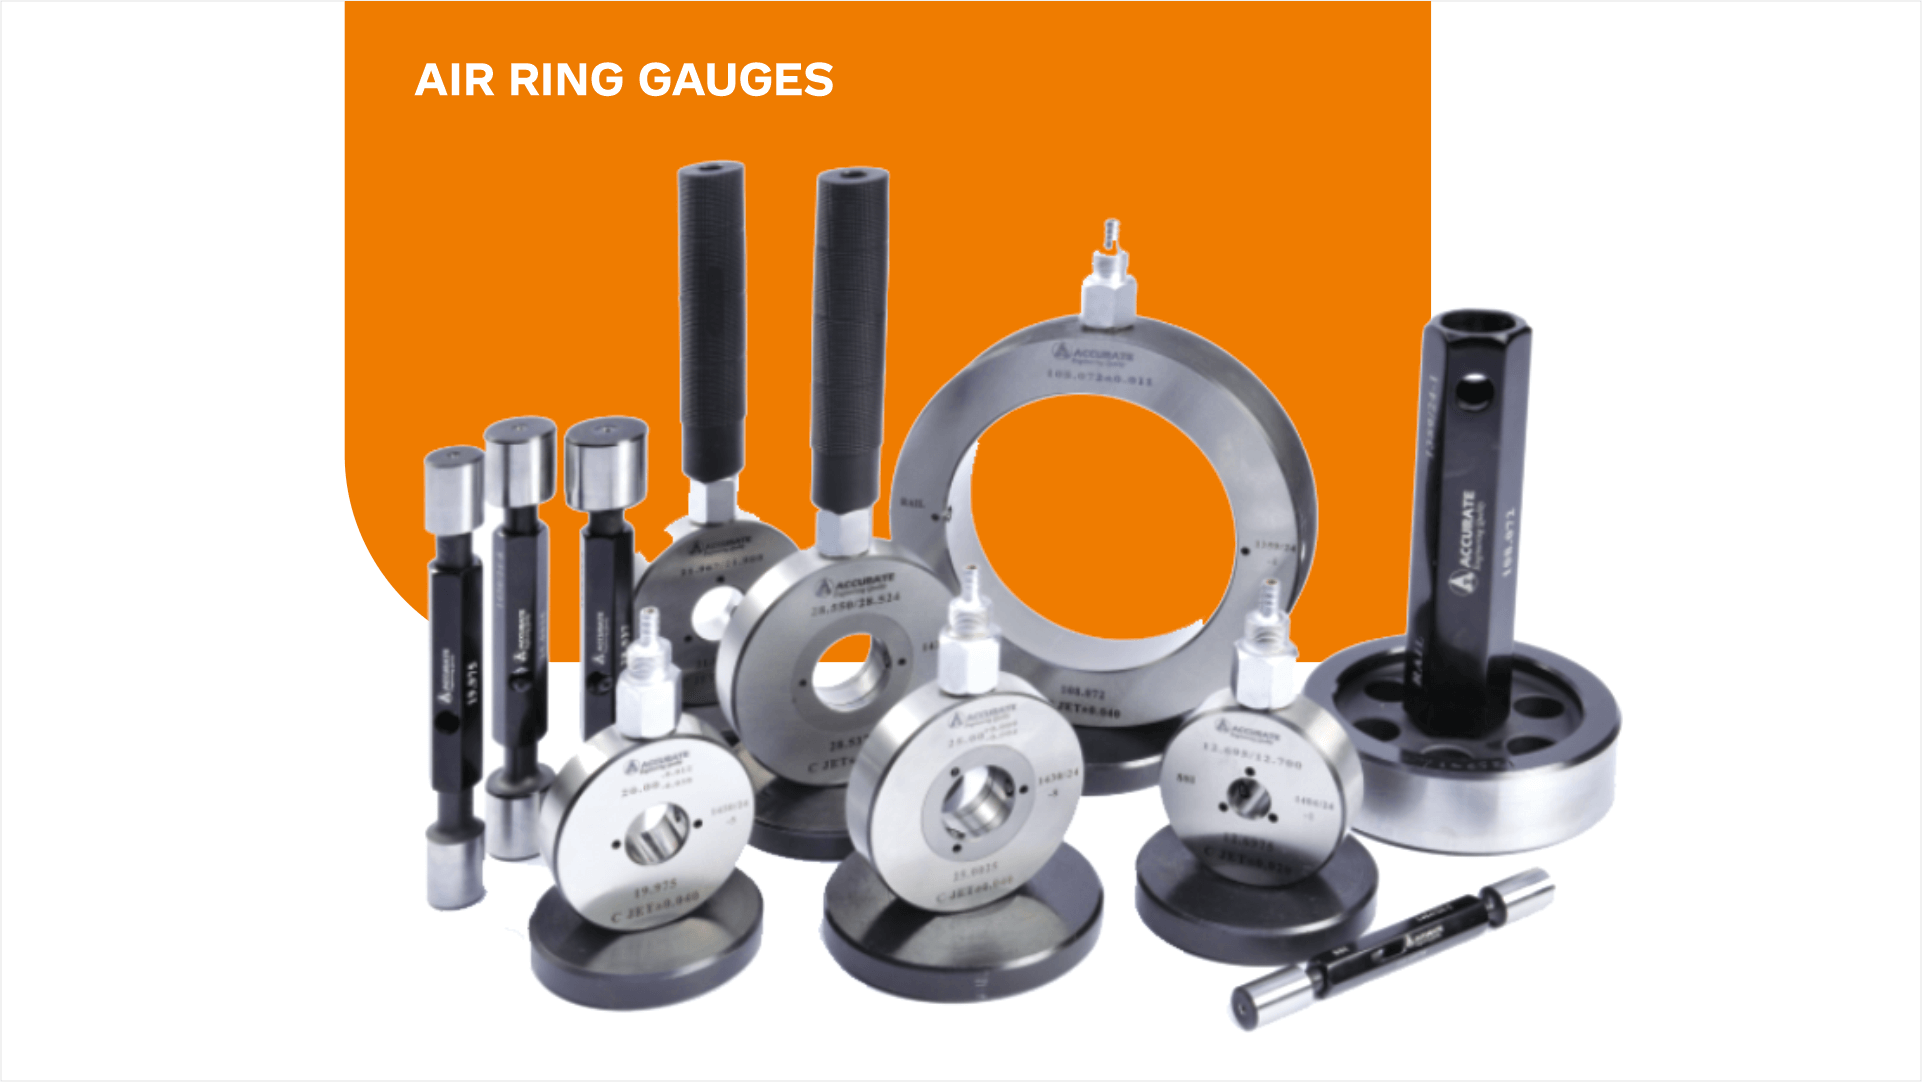 Gauge - Definition, Types of Gauges, and FAQs